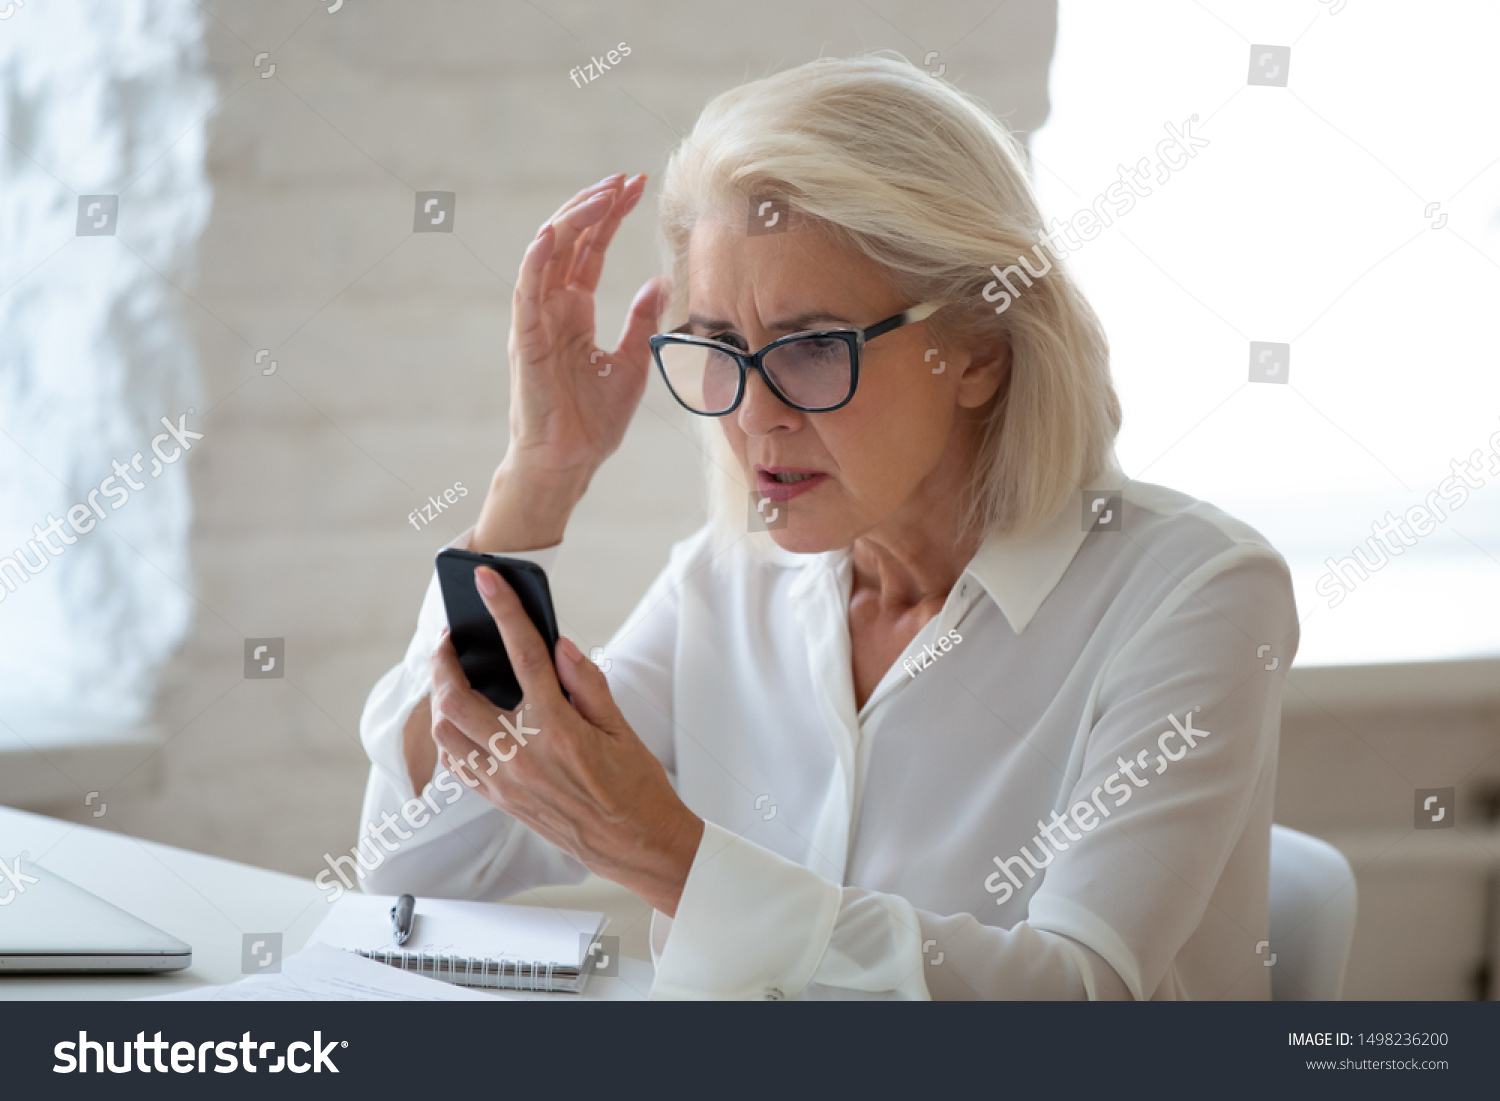 Confused senior businesswoman sit at office desk hold cellphone experience internet connection problem, frustrated aged woman worker feel disappointed having smartphone breakdown or virus attack #1498236200